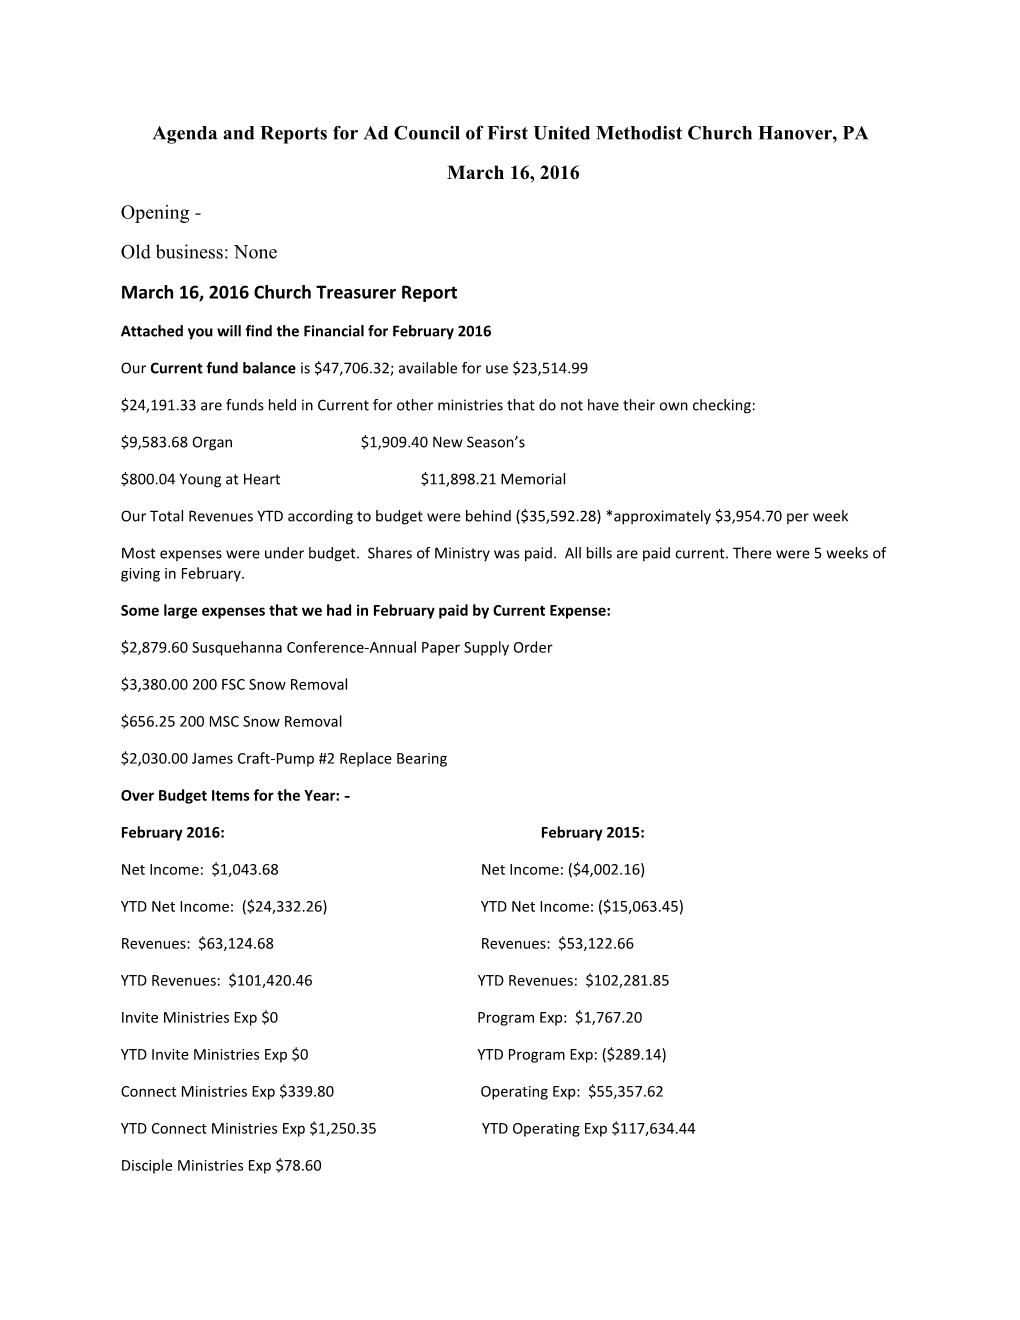 Agenda and Reports for Ad Council of First United Methodist Church Hanover, PA